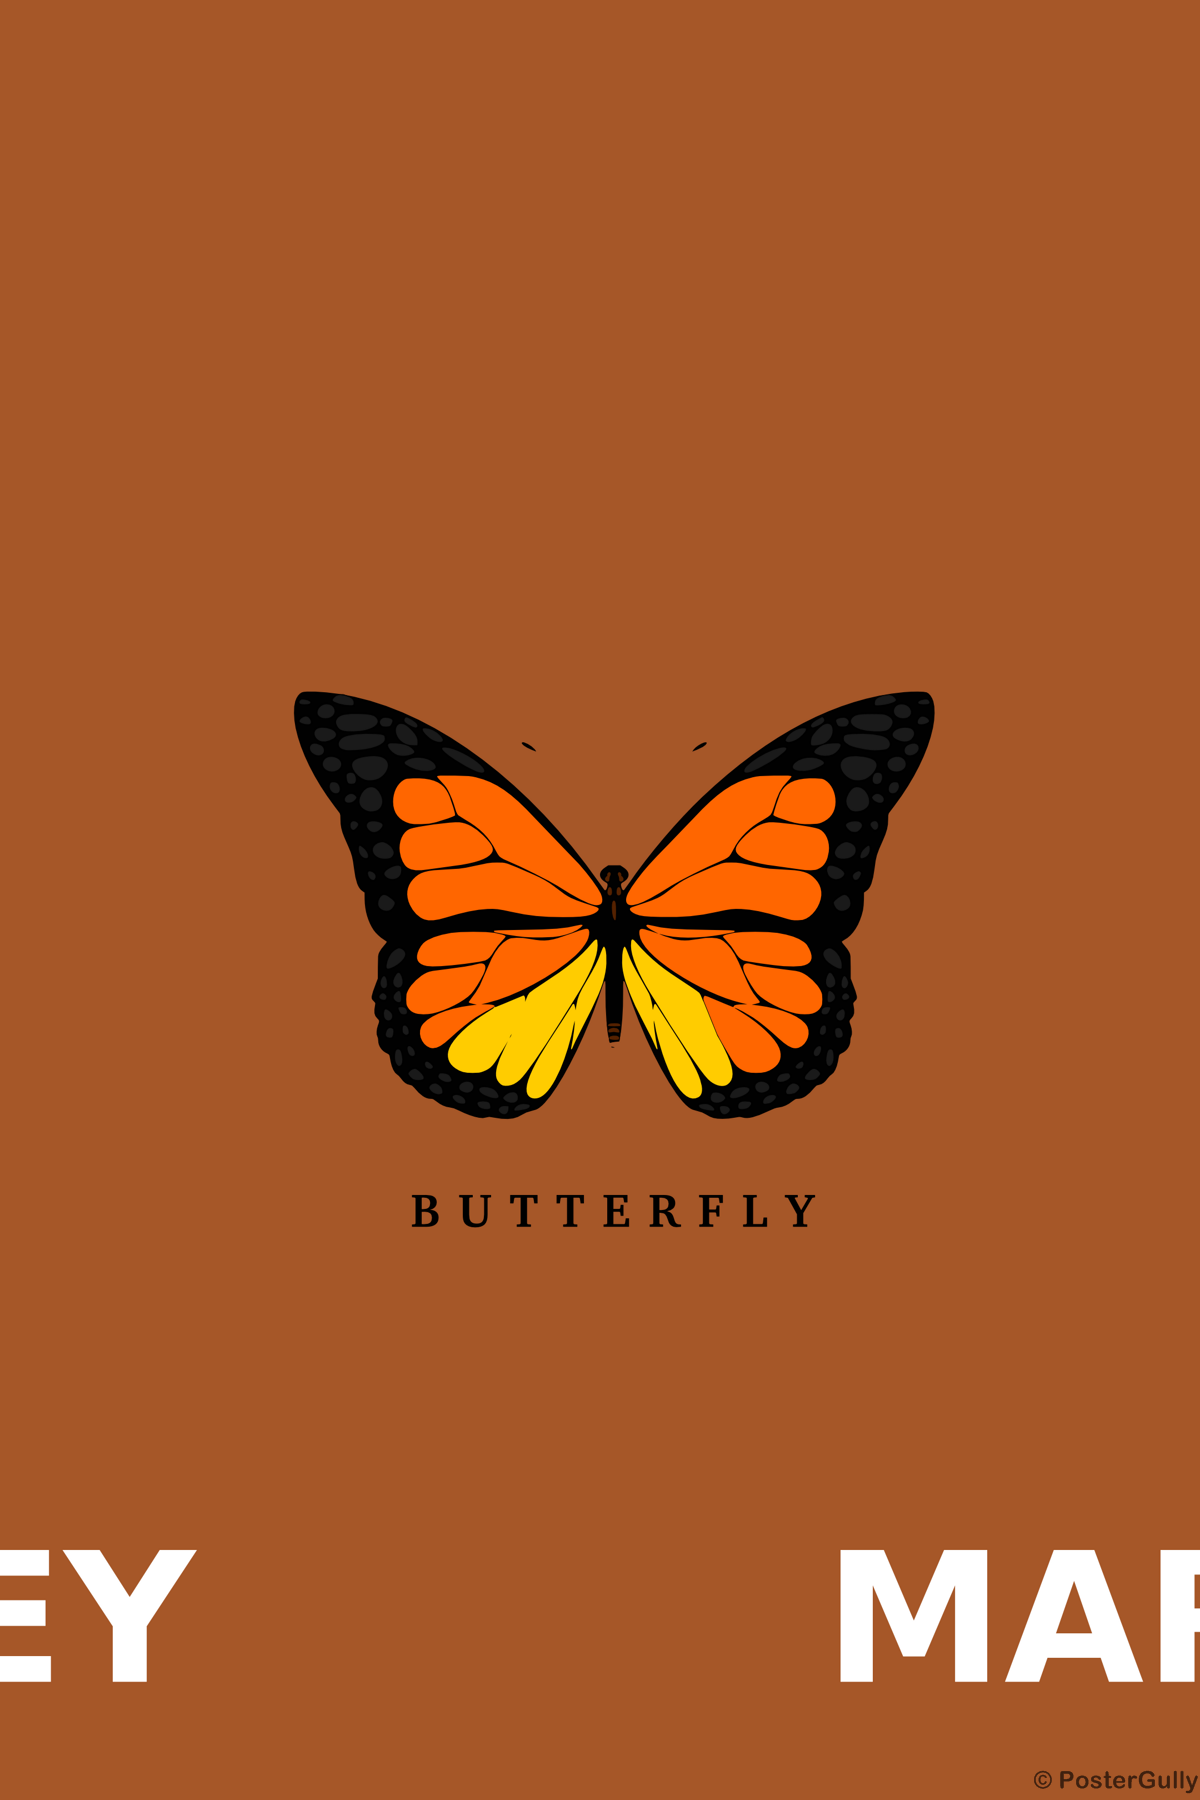 Wall Art, Mariah Carey Butterfly, - PosterGully